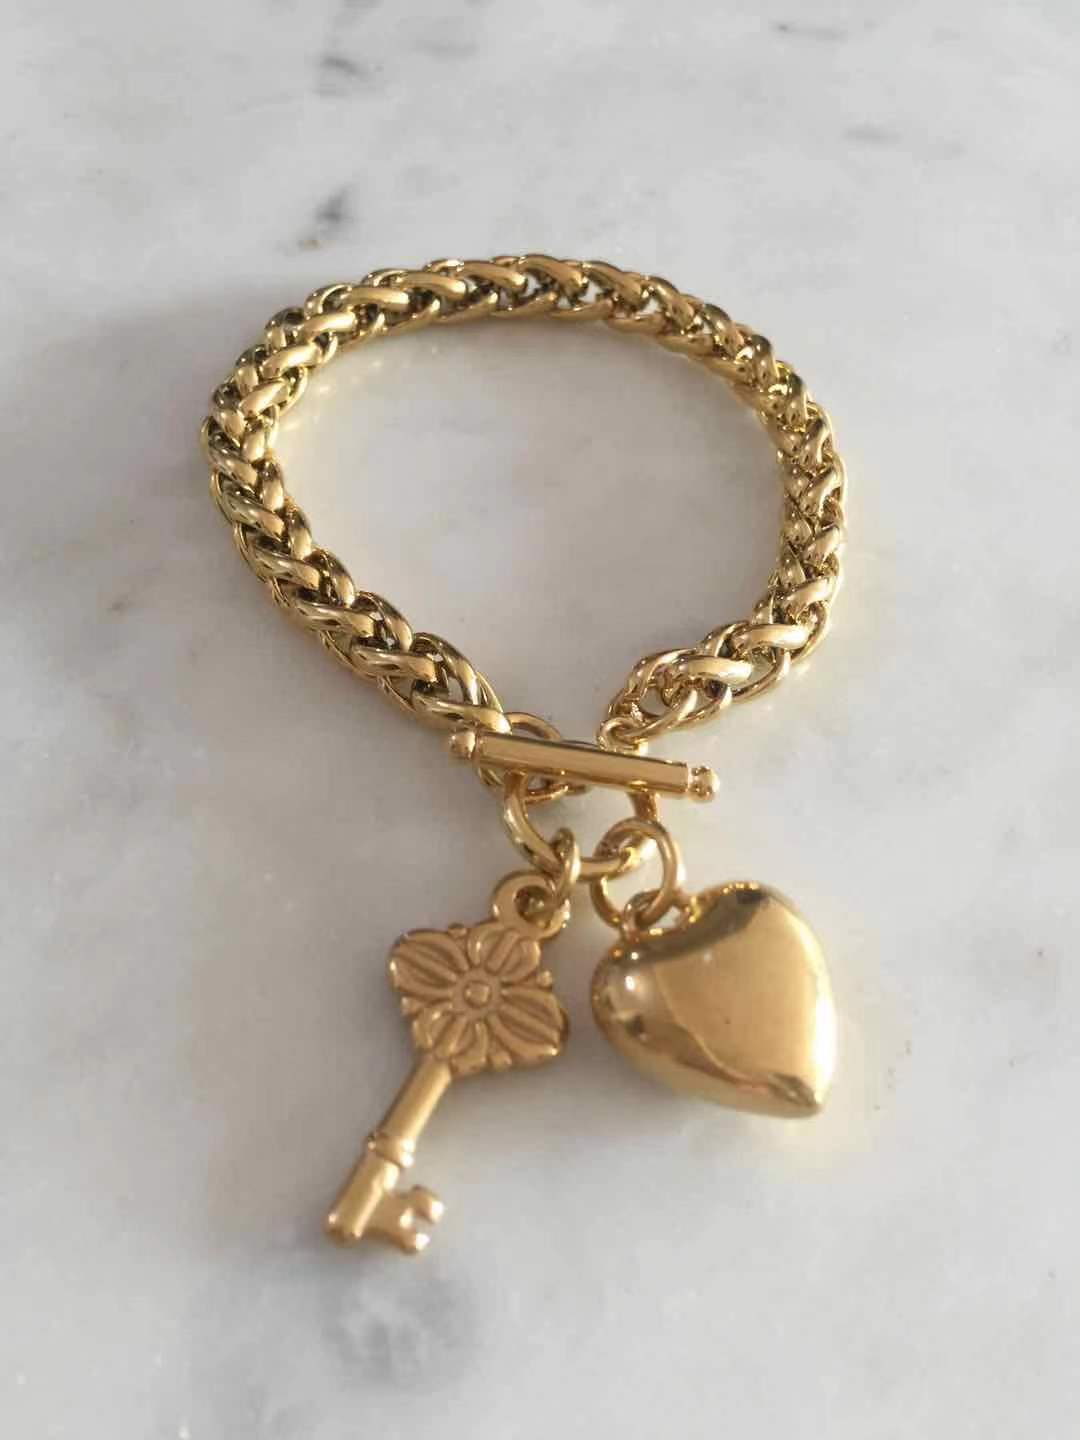 Puffy Heart & Key Toggle Lock bracelet with Stacia chain